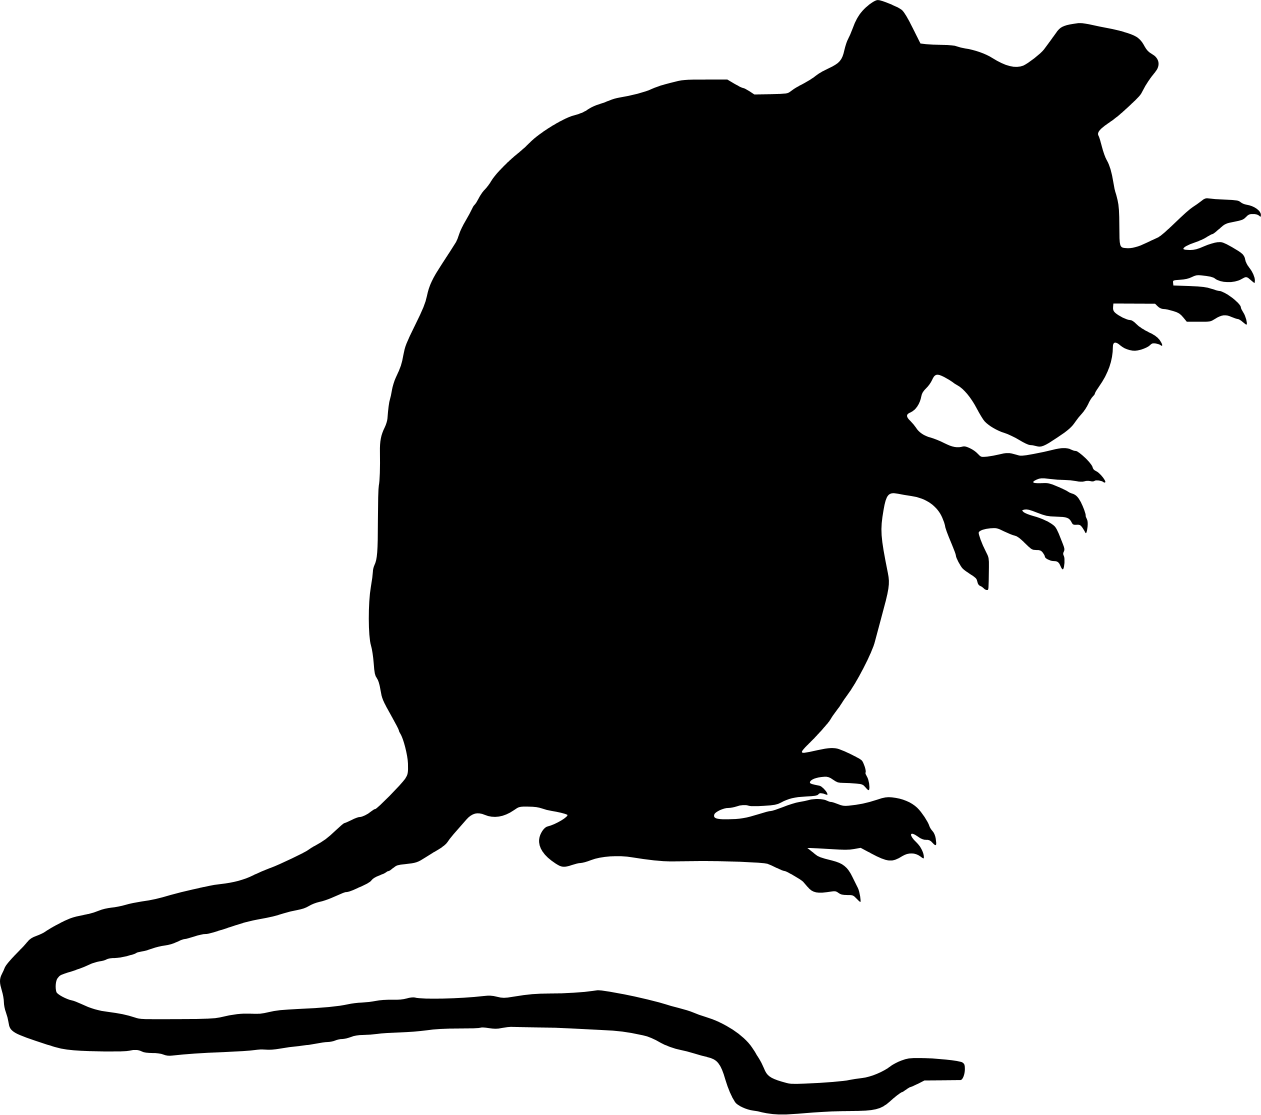 25 Rat Silhouette Free Cliparts That You Can Download To You Computer